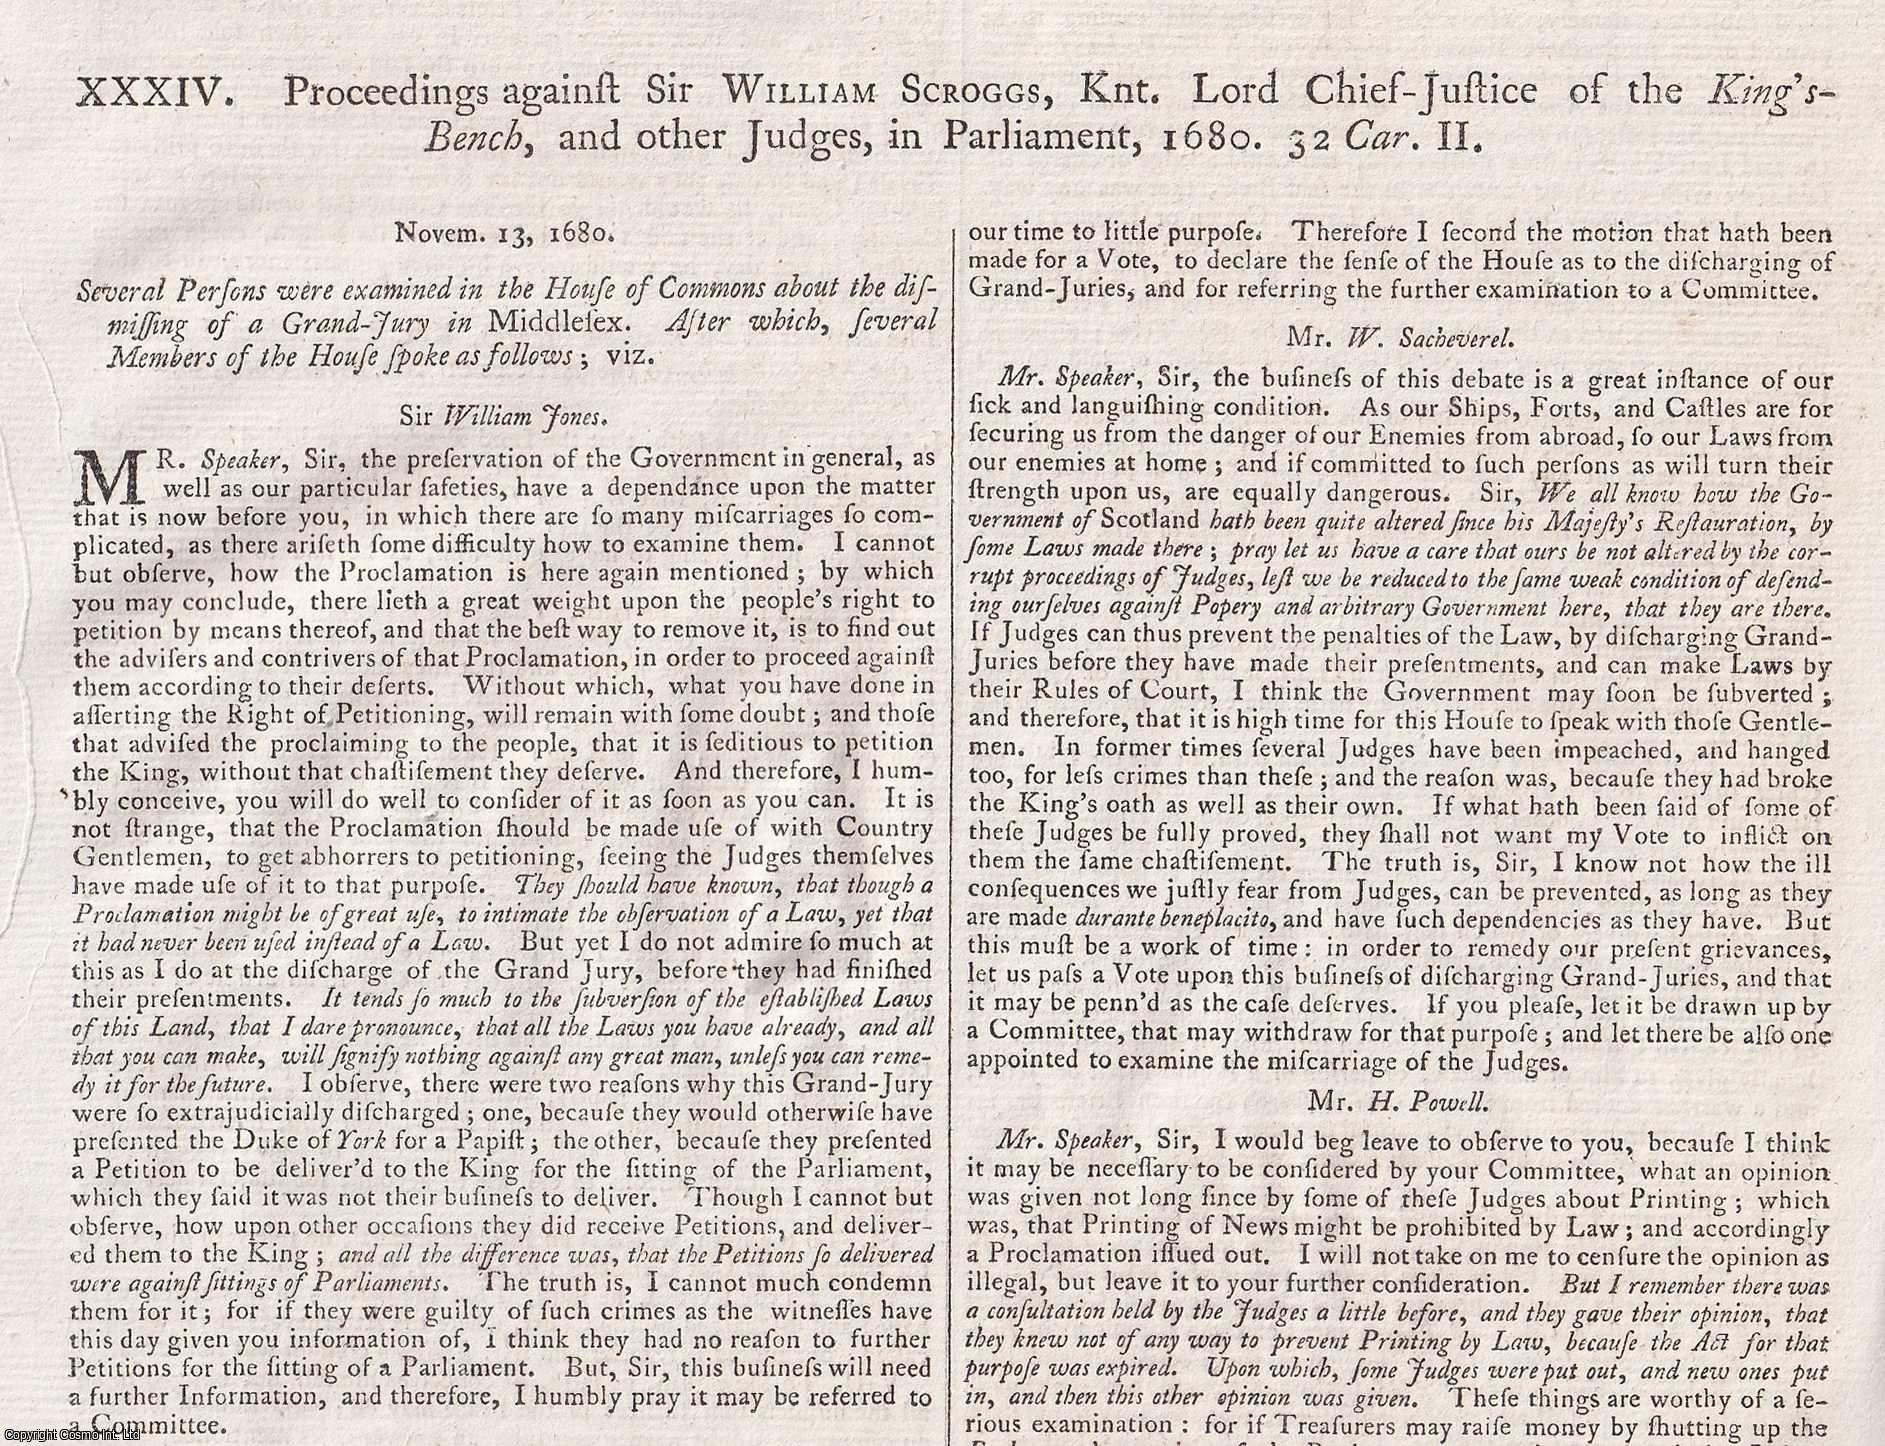 [Trial] - POPISH PLOT. Articles of High Misdemeanours, humbly offered and presented to the Consideration of his most Sacred Majesty, and his Honourable Privy Council, against Sir William Scroggs, Lord Chief Justice of the King's Bench. An original article from the Collected State Trials.